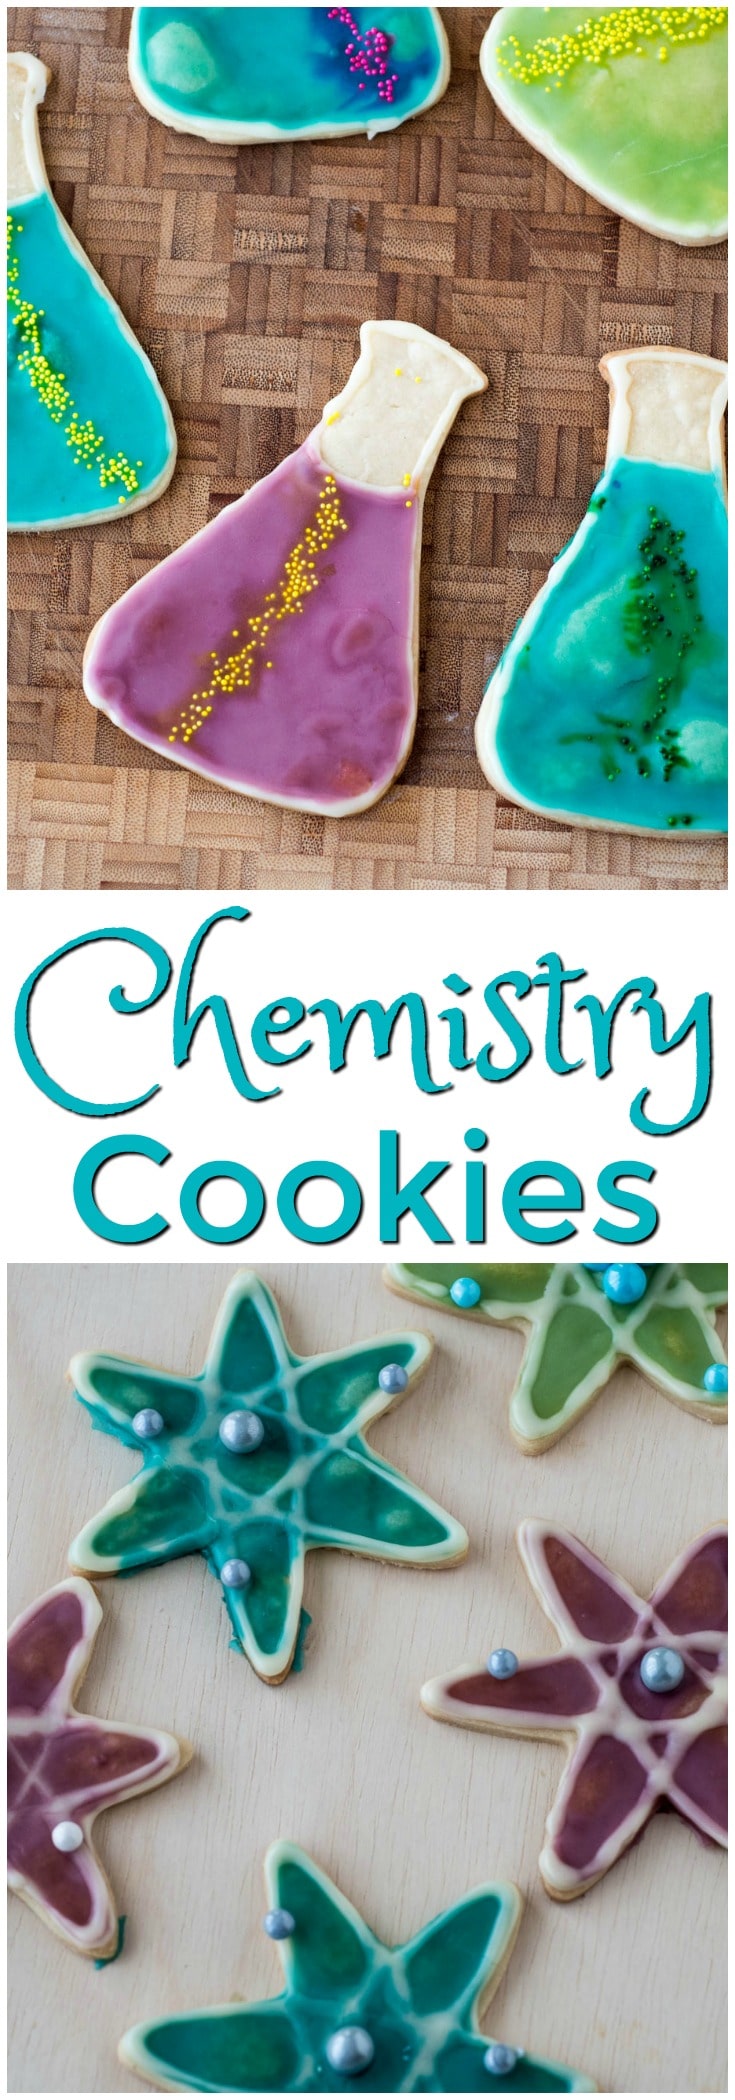 Chemistry cookies with the words chemistry cookies.